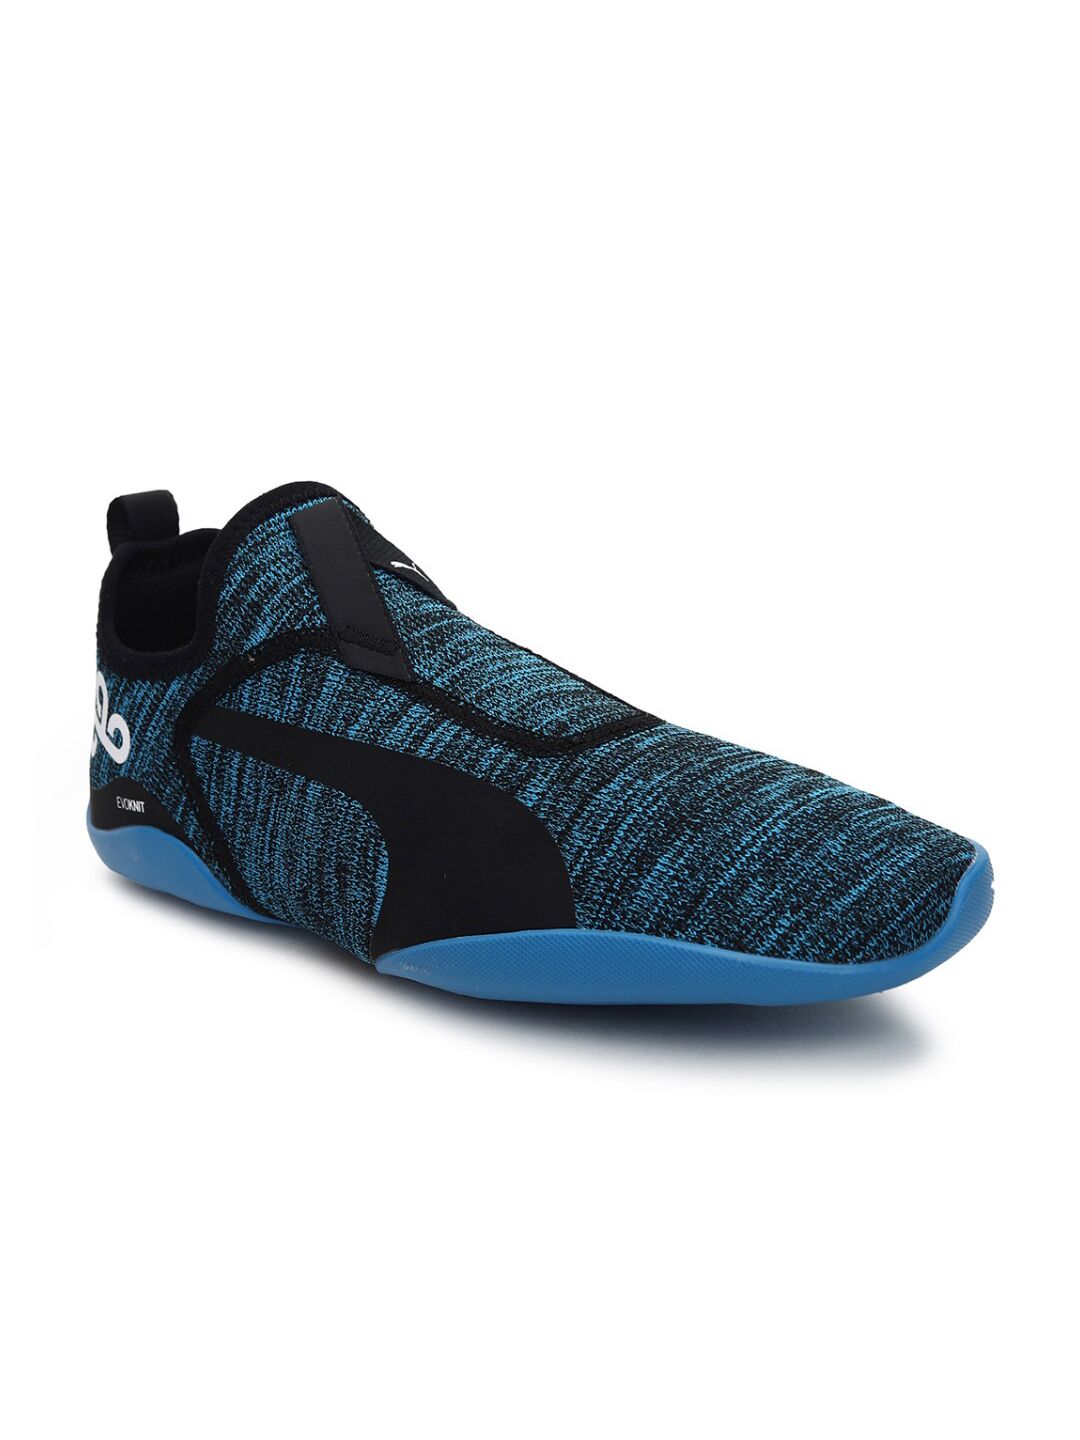 Puma Unisex Blue AGF Evoknit Cloud9 Textile Running Shoes Price in India